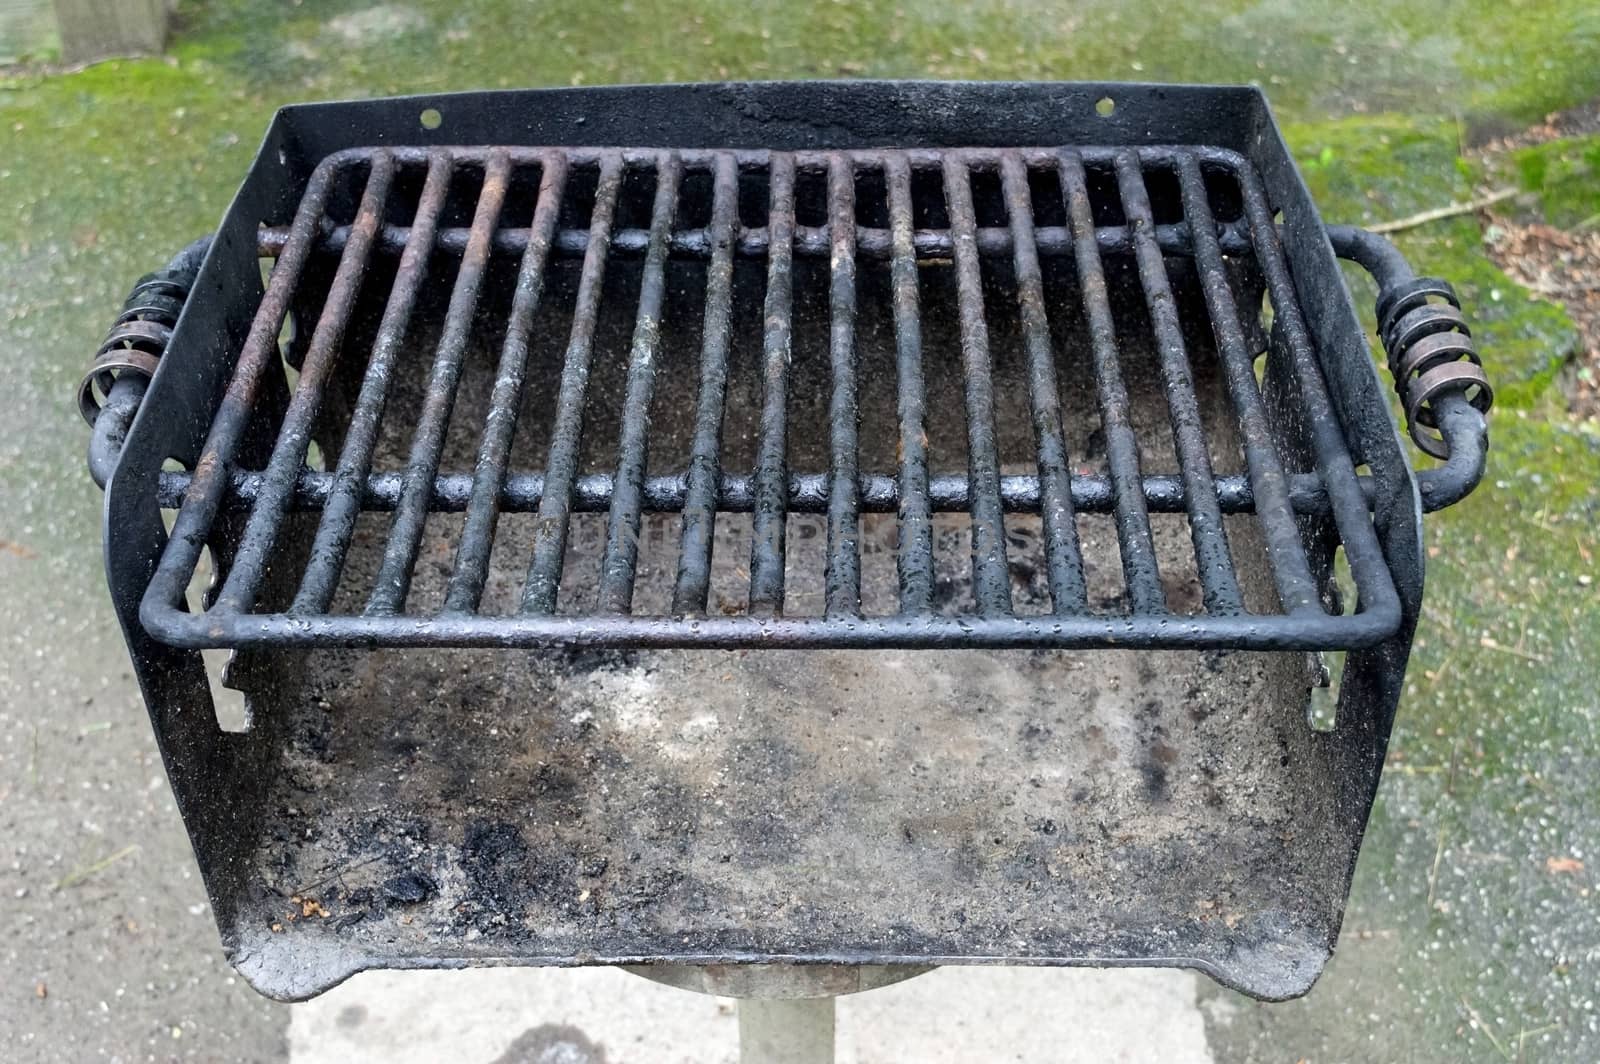 Horizontal close-up shot of a well used public area barbecue grill.